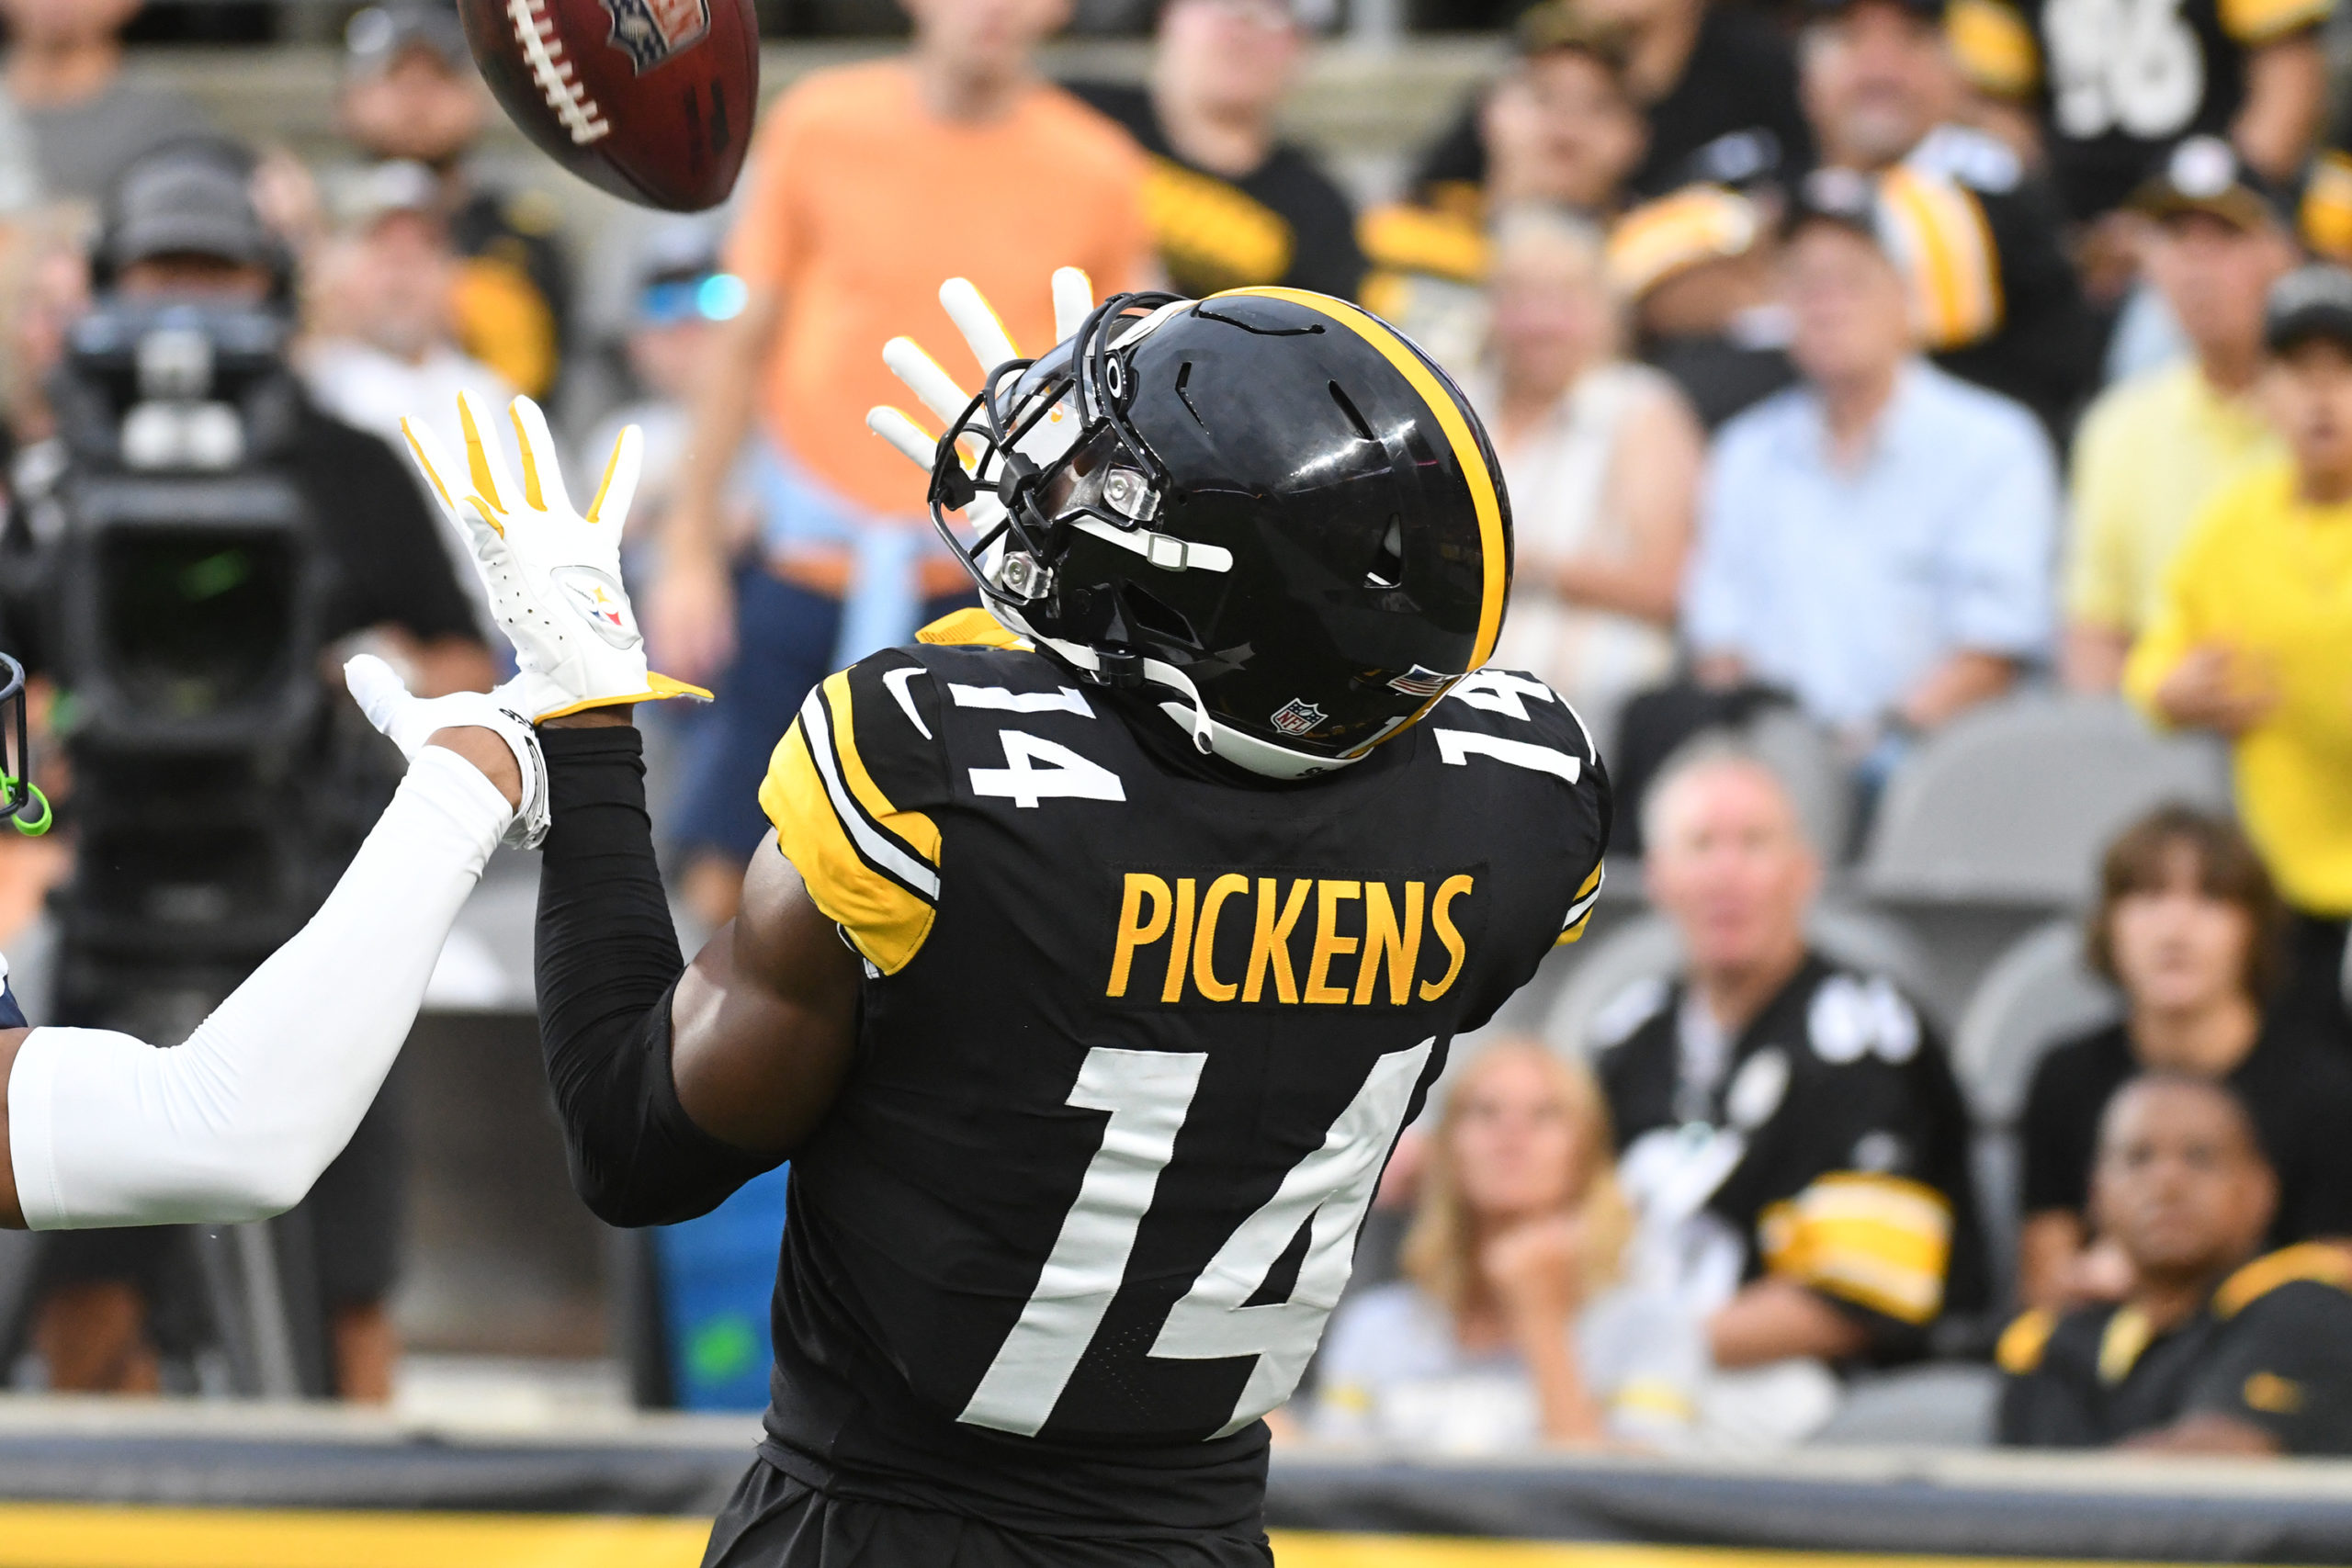 Believe Hype on Pickett, Pickens … and Other Week 1 Expert Insights